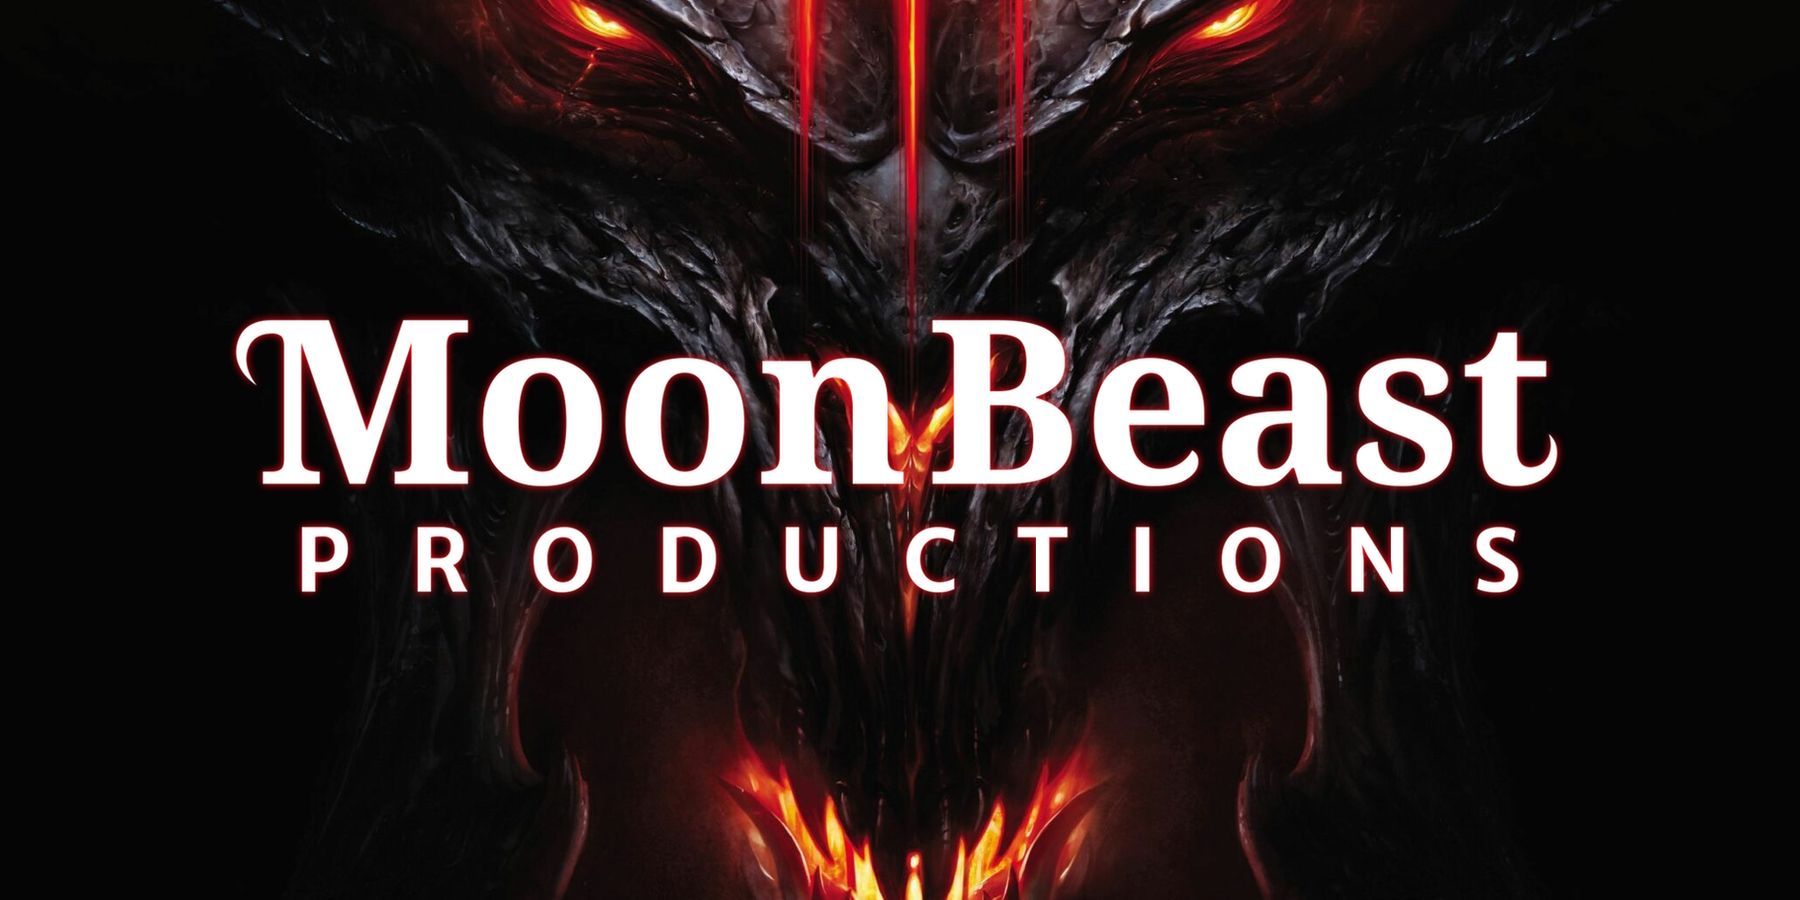 The logo for developer Moon Beast Productions composited on a Diablo background